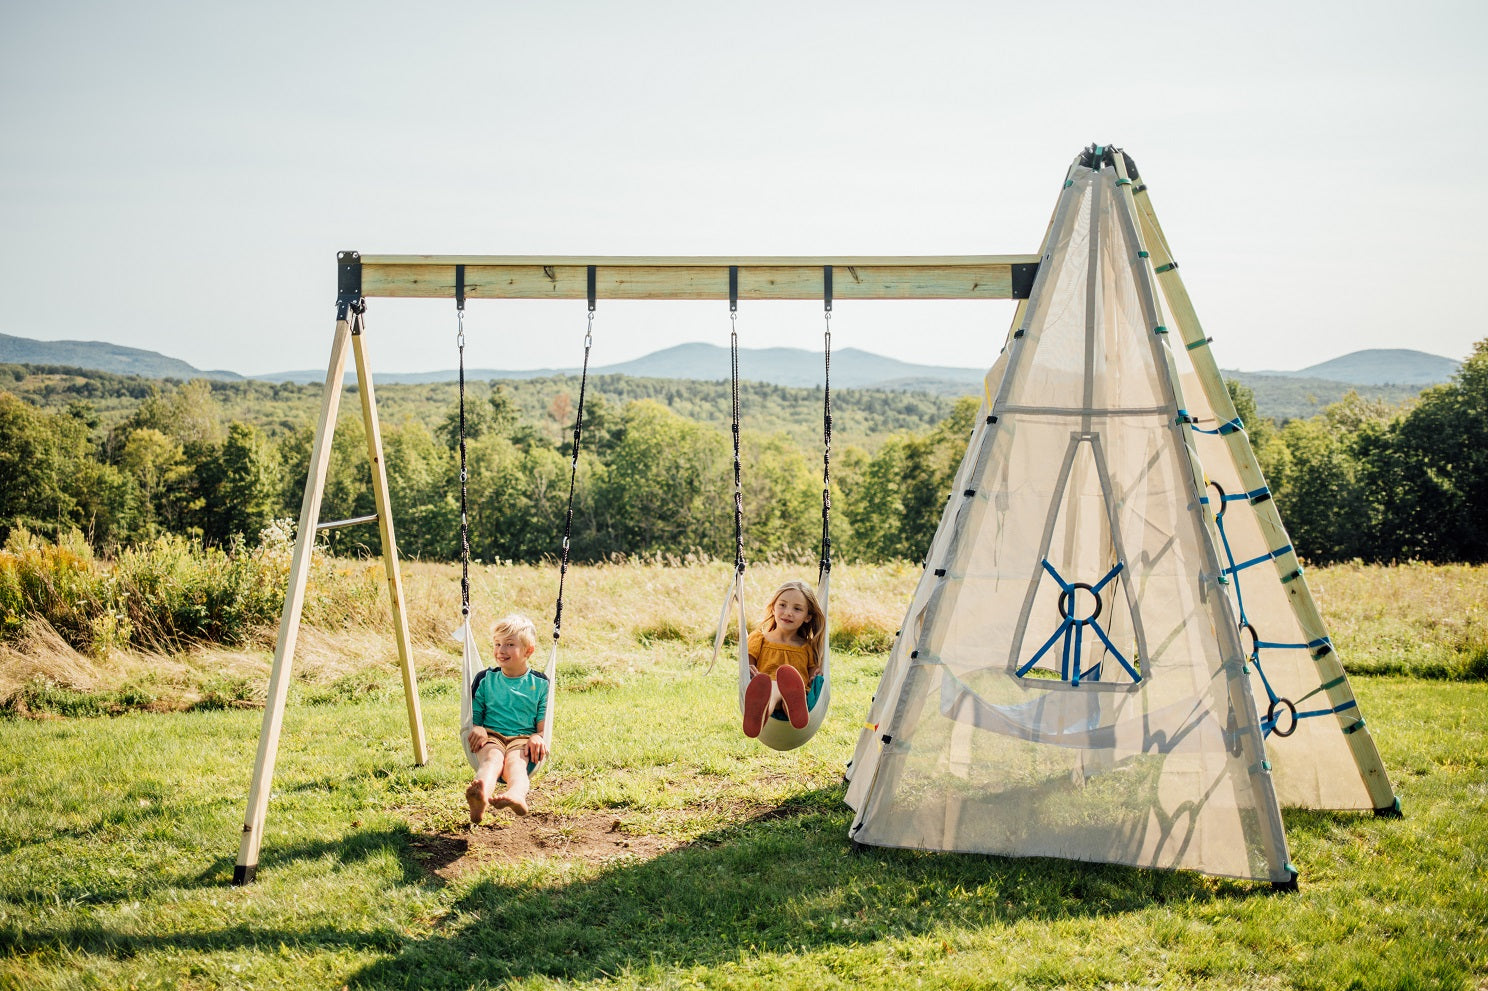 Outdoor Teepees: Create a Cozy Retreat for Kids and Adults